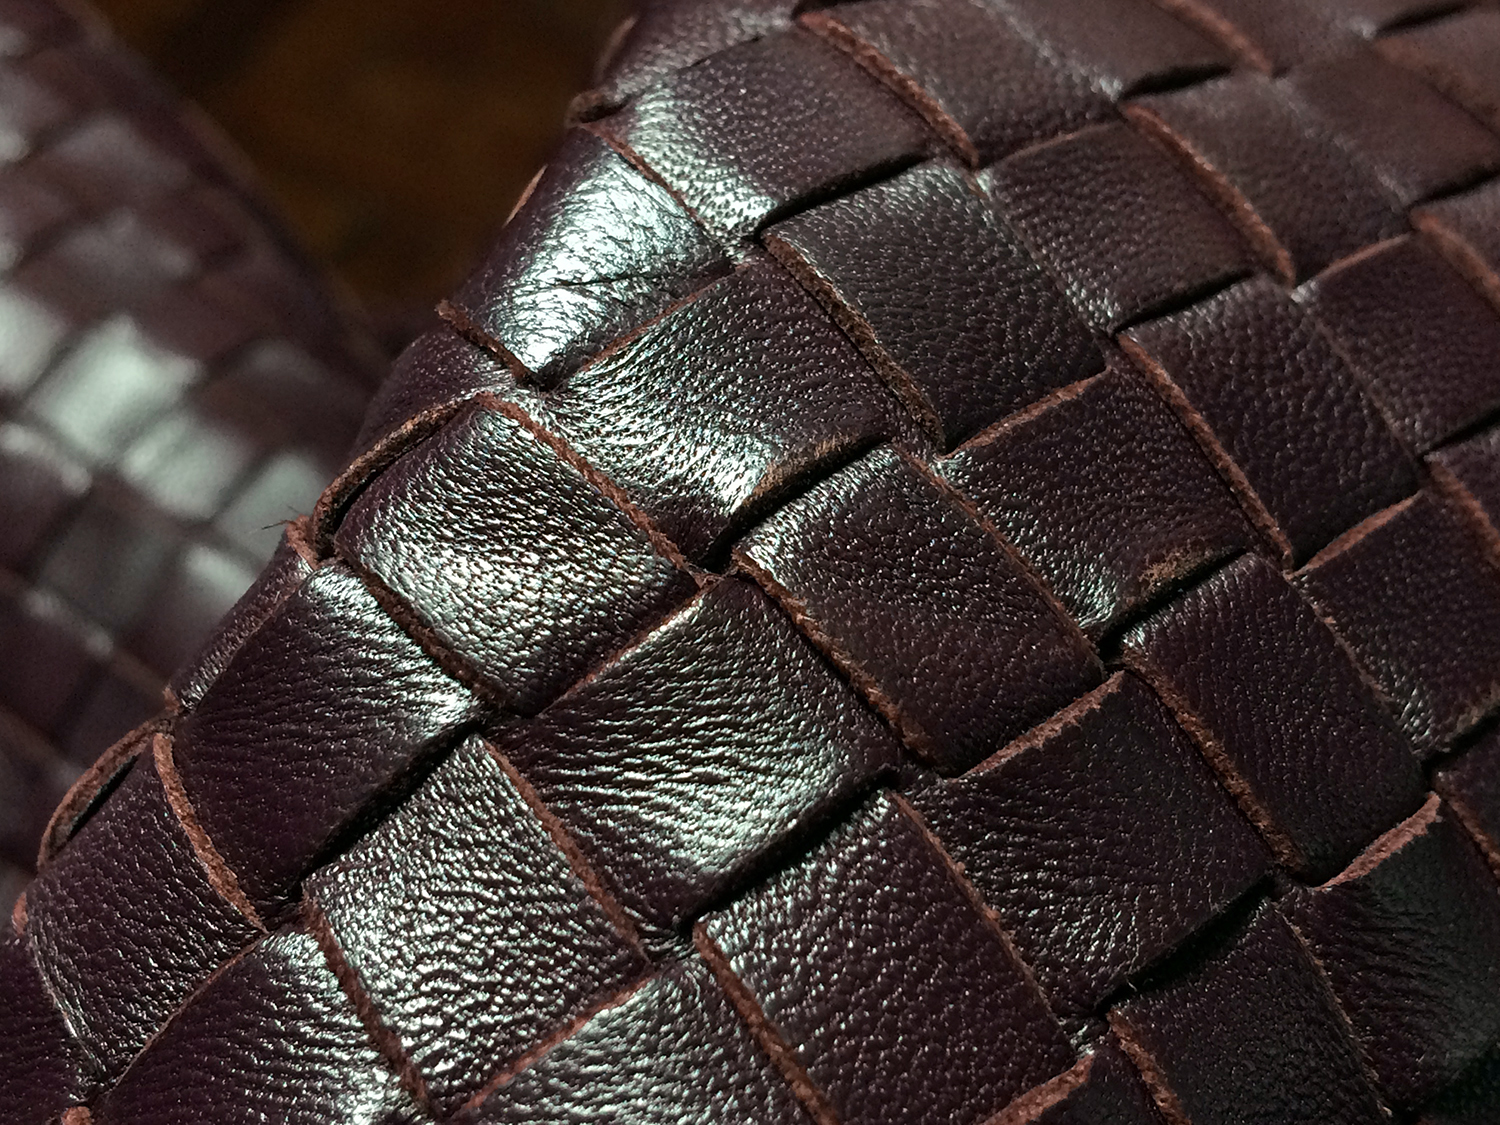 Here are 7 interesting things to know about Bottega Veneta